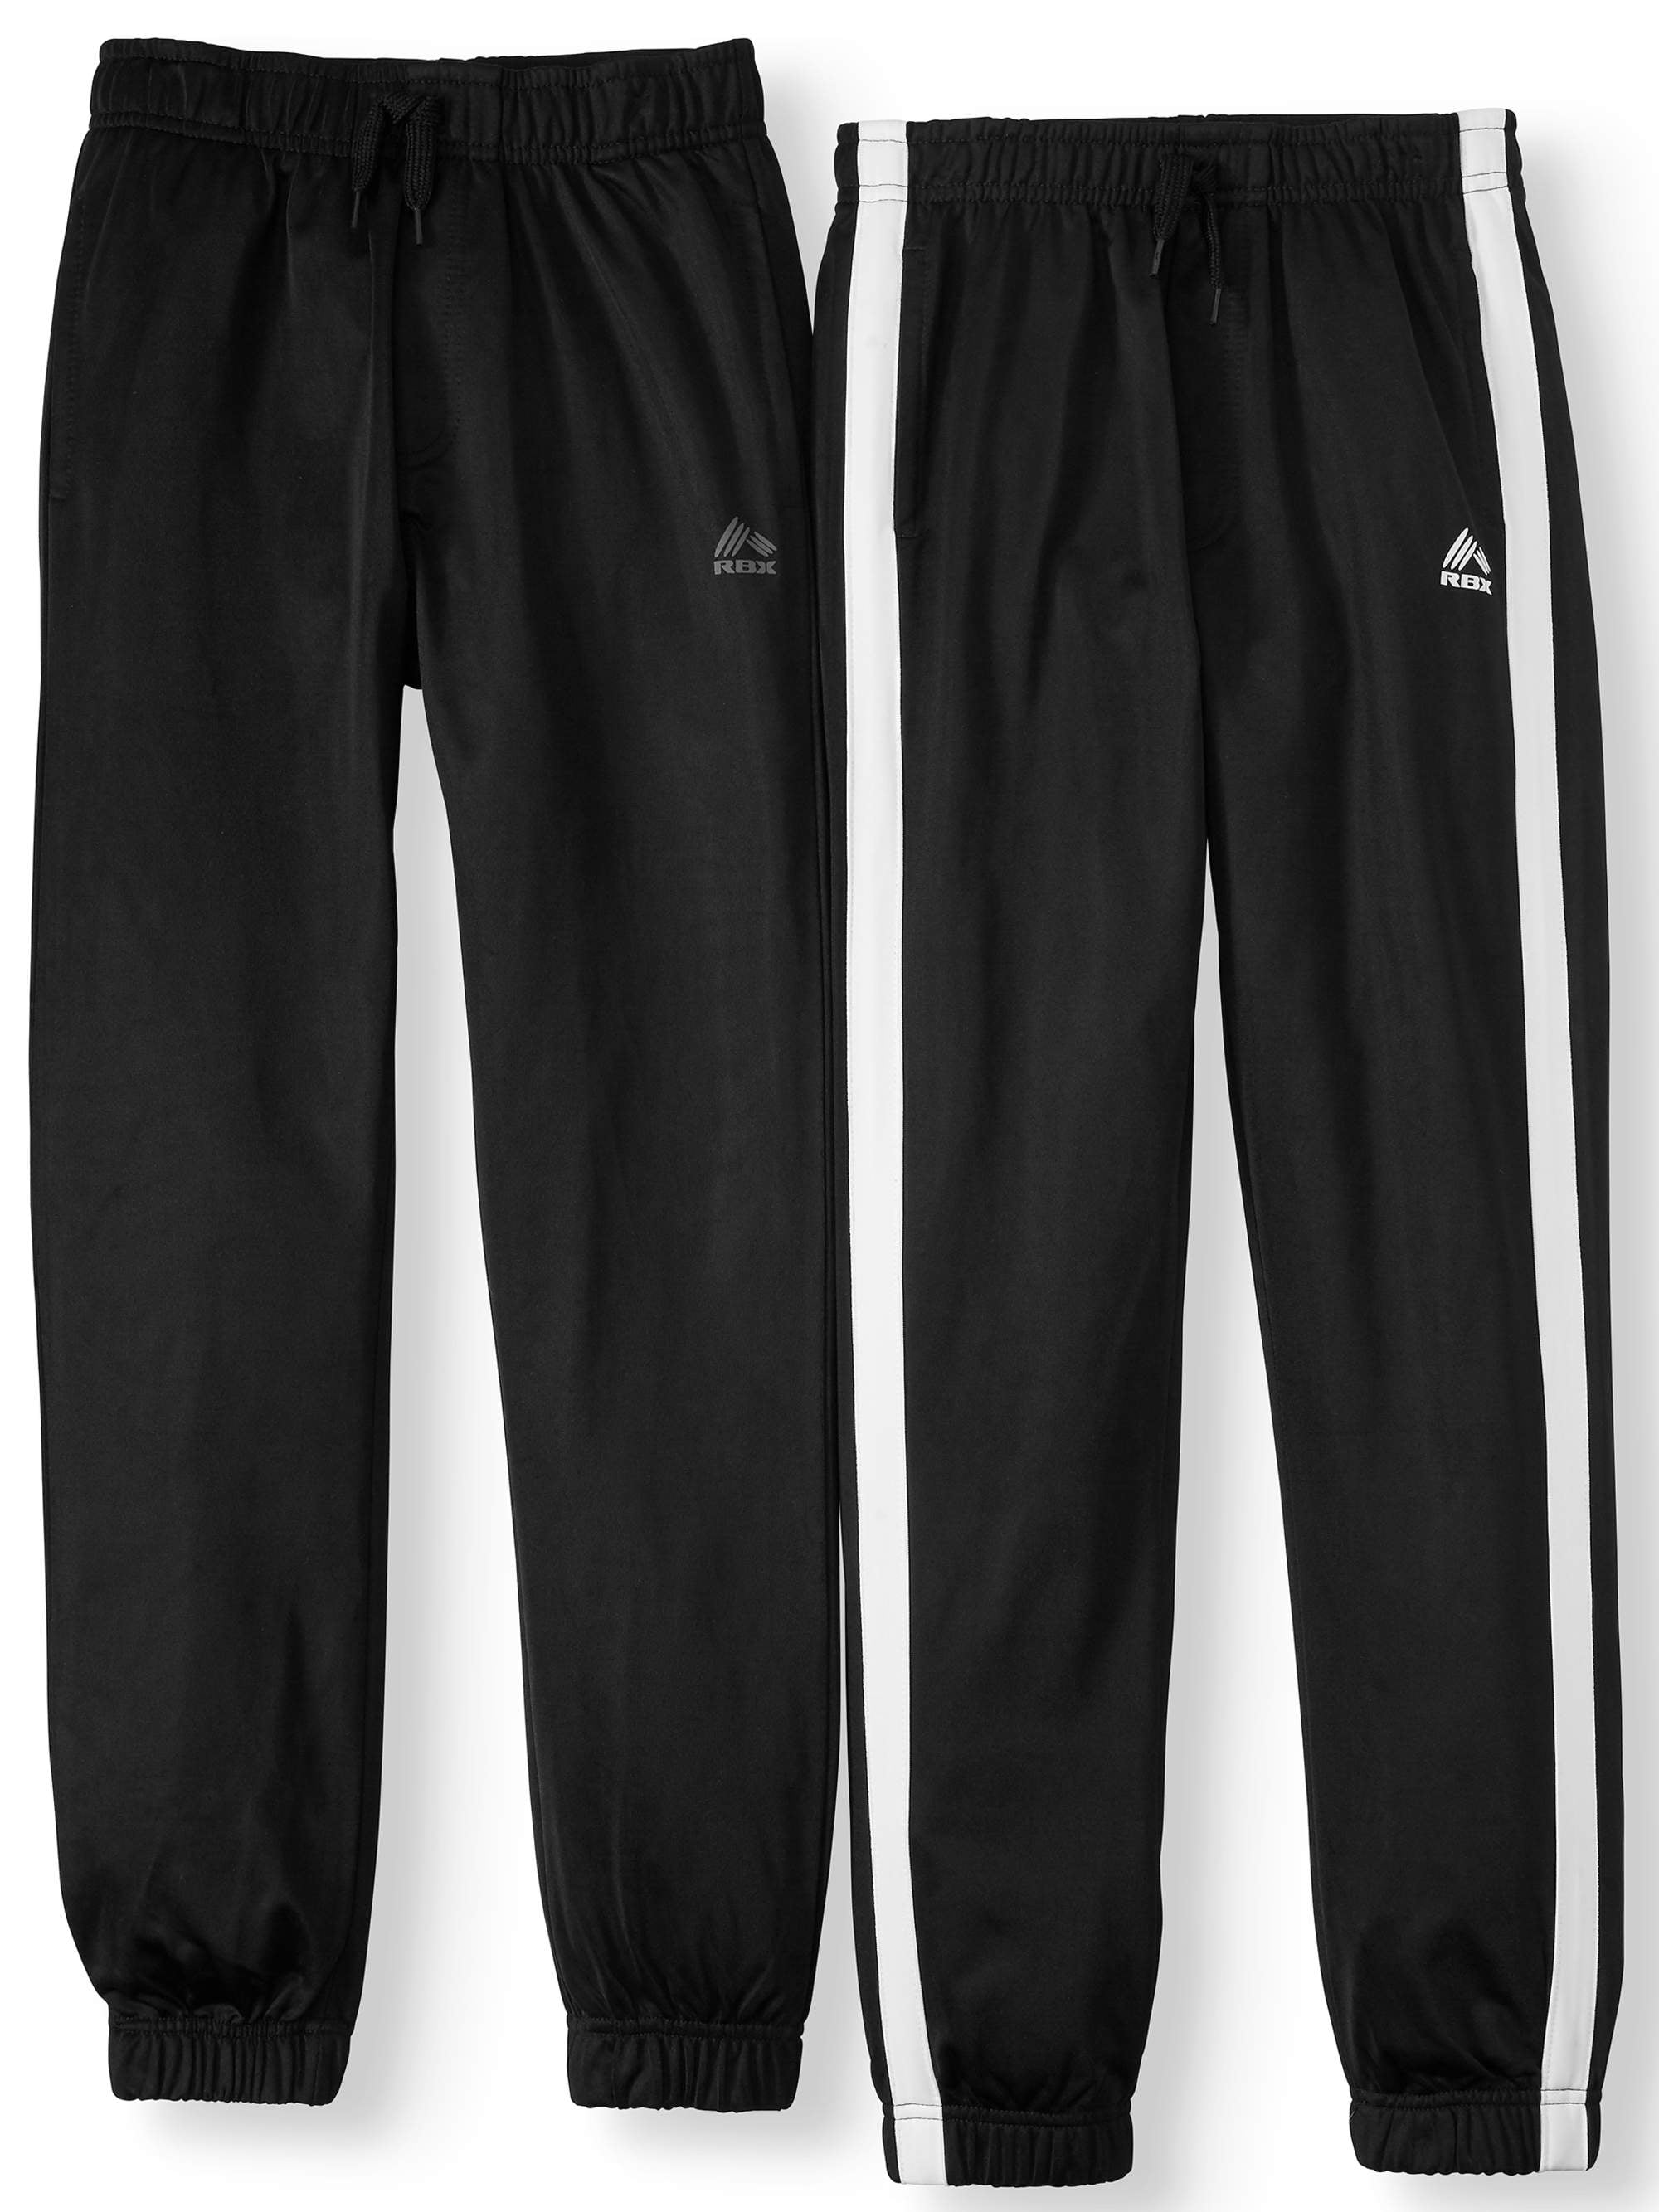 RBX Athletic Tricot Jogger Pants with Contrast Taping, 2-Pack (Little